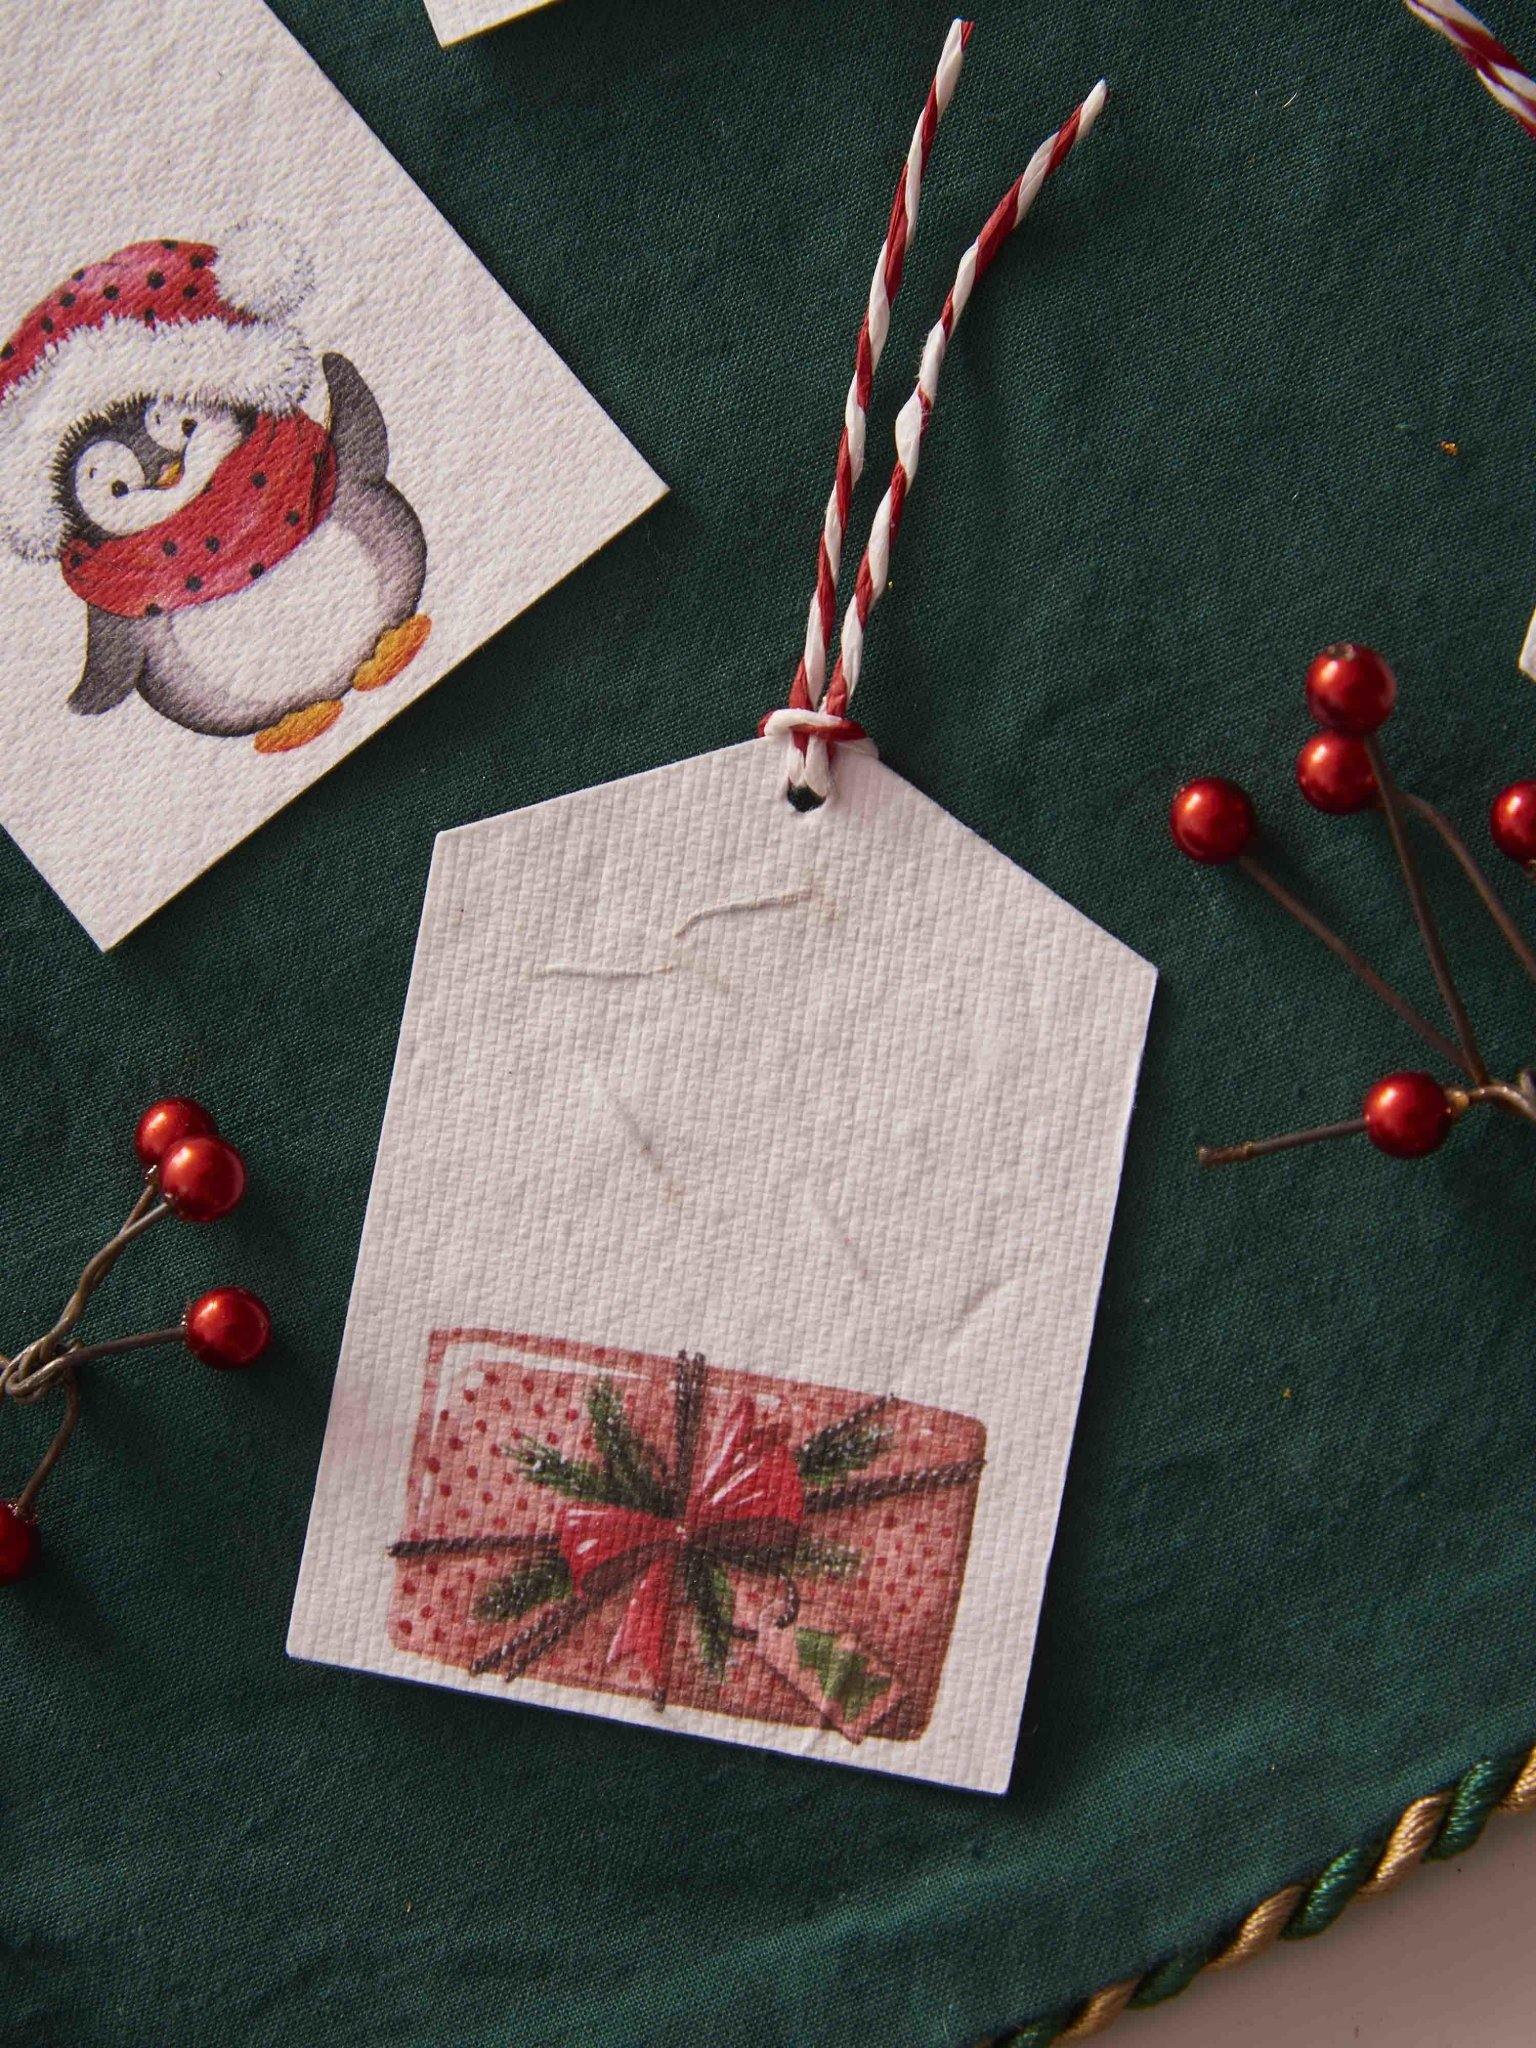 How to Make Quick and Easy Candy Cane Christmas Gift Tags